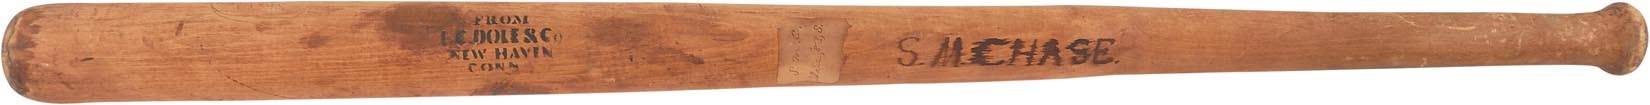 Early Baseball - 1883 L.C. Dole Bat Used by Samuel M. Chase for Yale